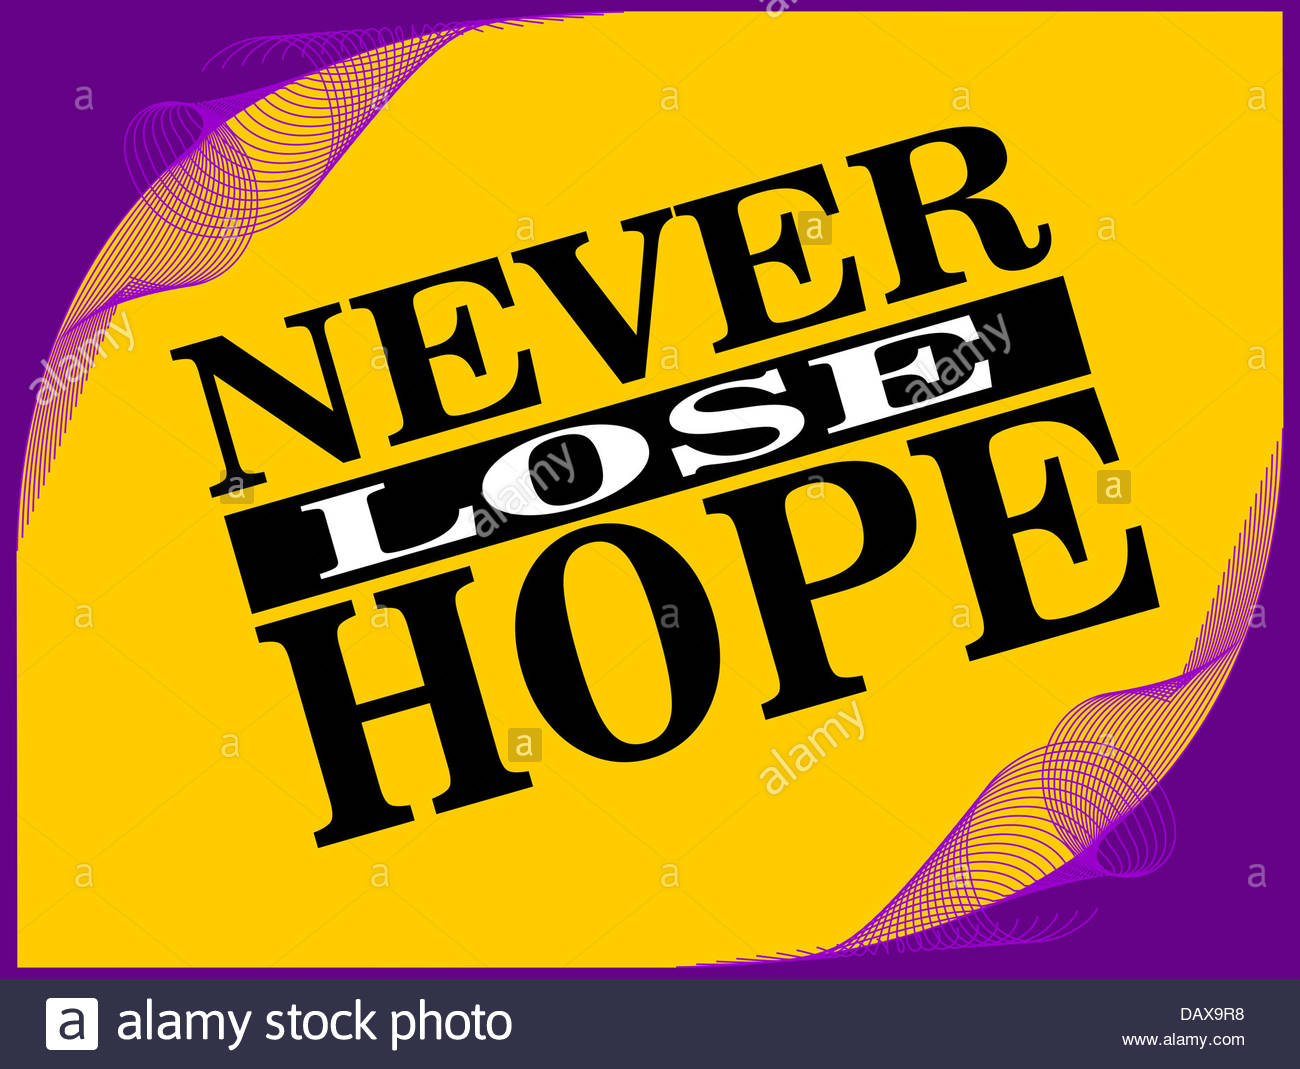 Poster or wallpaper with an inspiring phrase Never lose hope